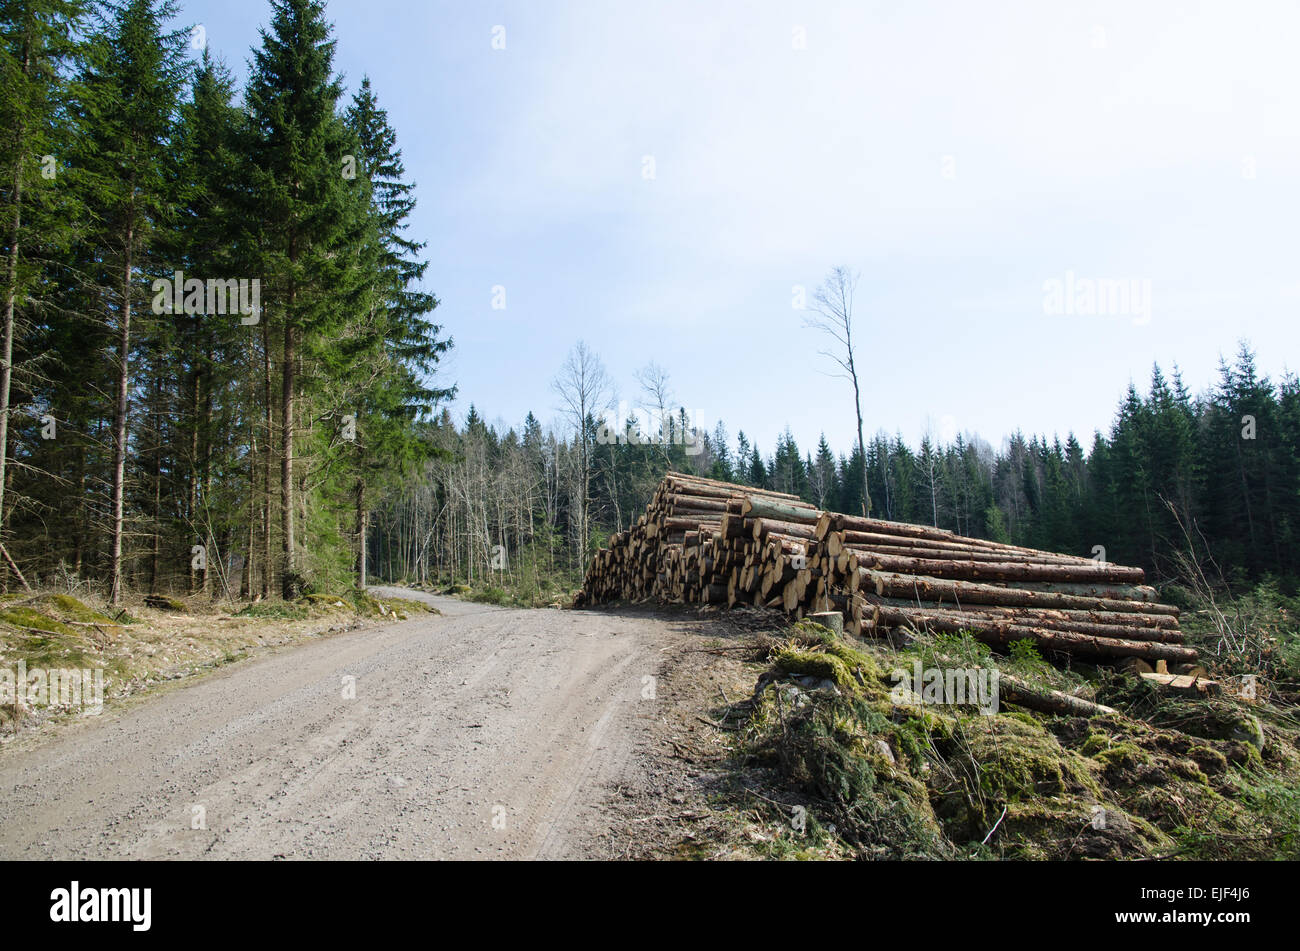 Newly cut timber in a stack at a gravel roadside in a coniferous forest in Sweden Stock Photo